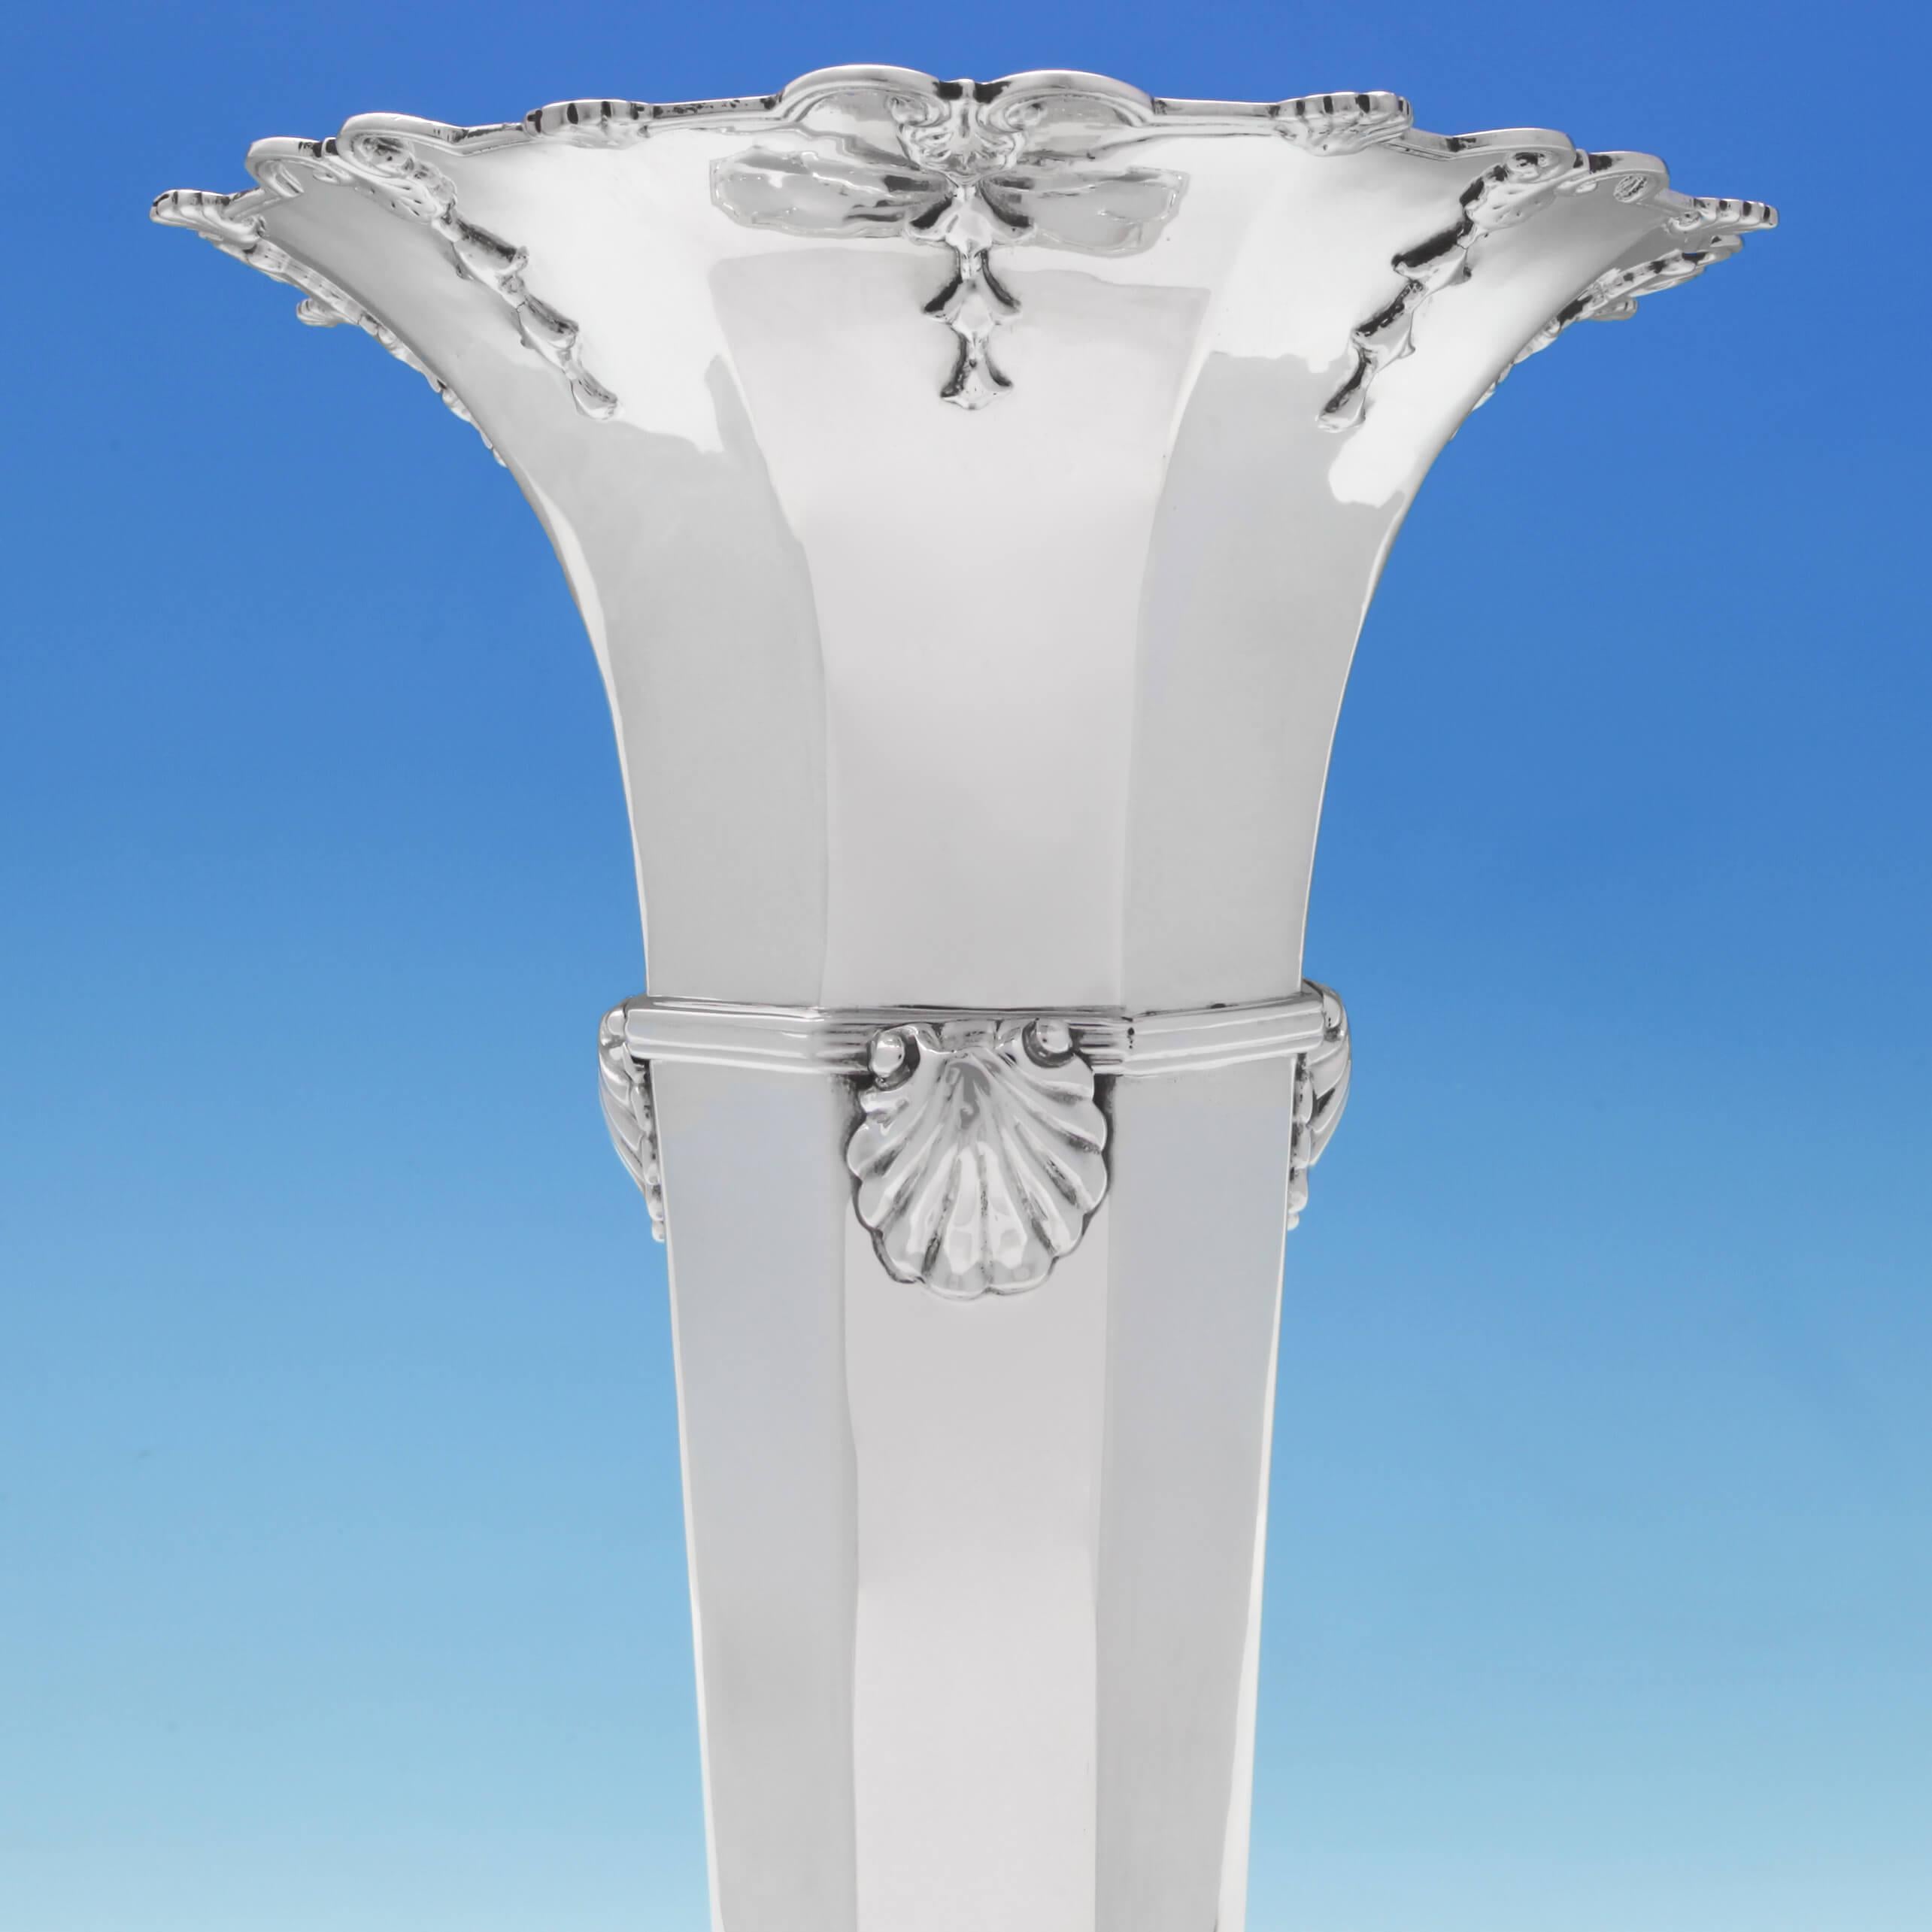 Hallmarked in London, in 1906, by William Comyns, this attractive, antique, Edwardian, sterling silver vase, has an octagonal panelled body with a reed and shell band around it, and applied decoration to the base and rim. The vase measures 14